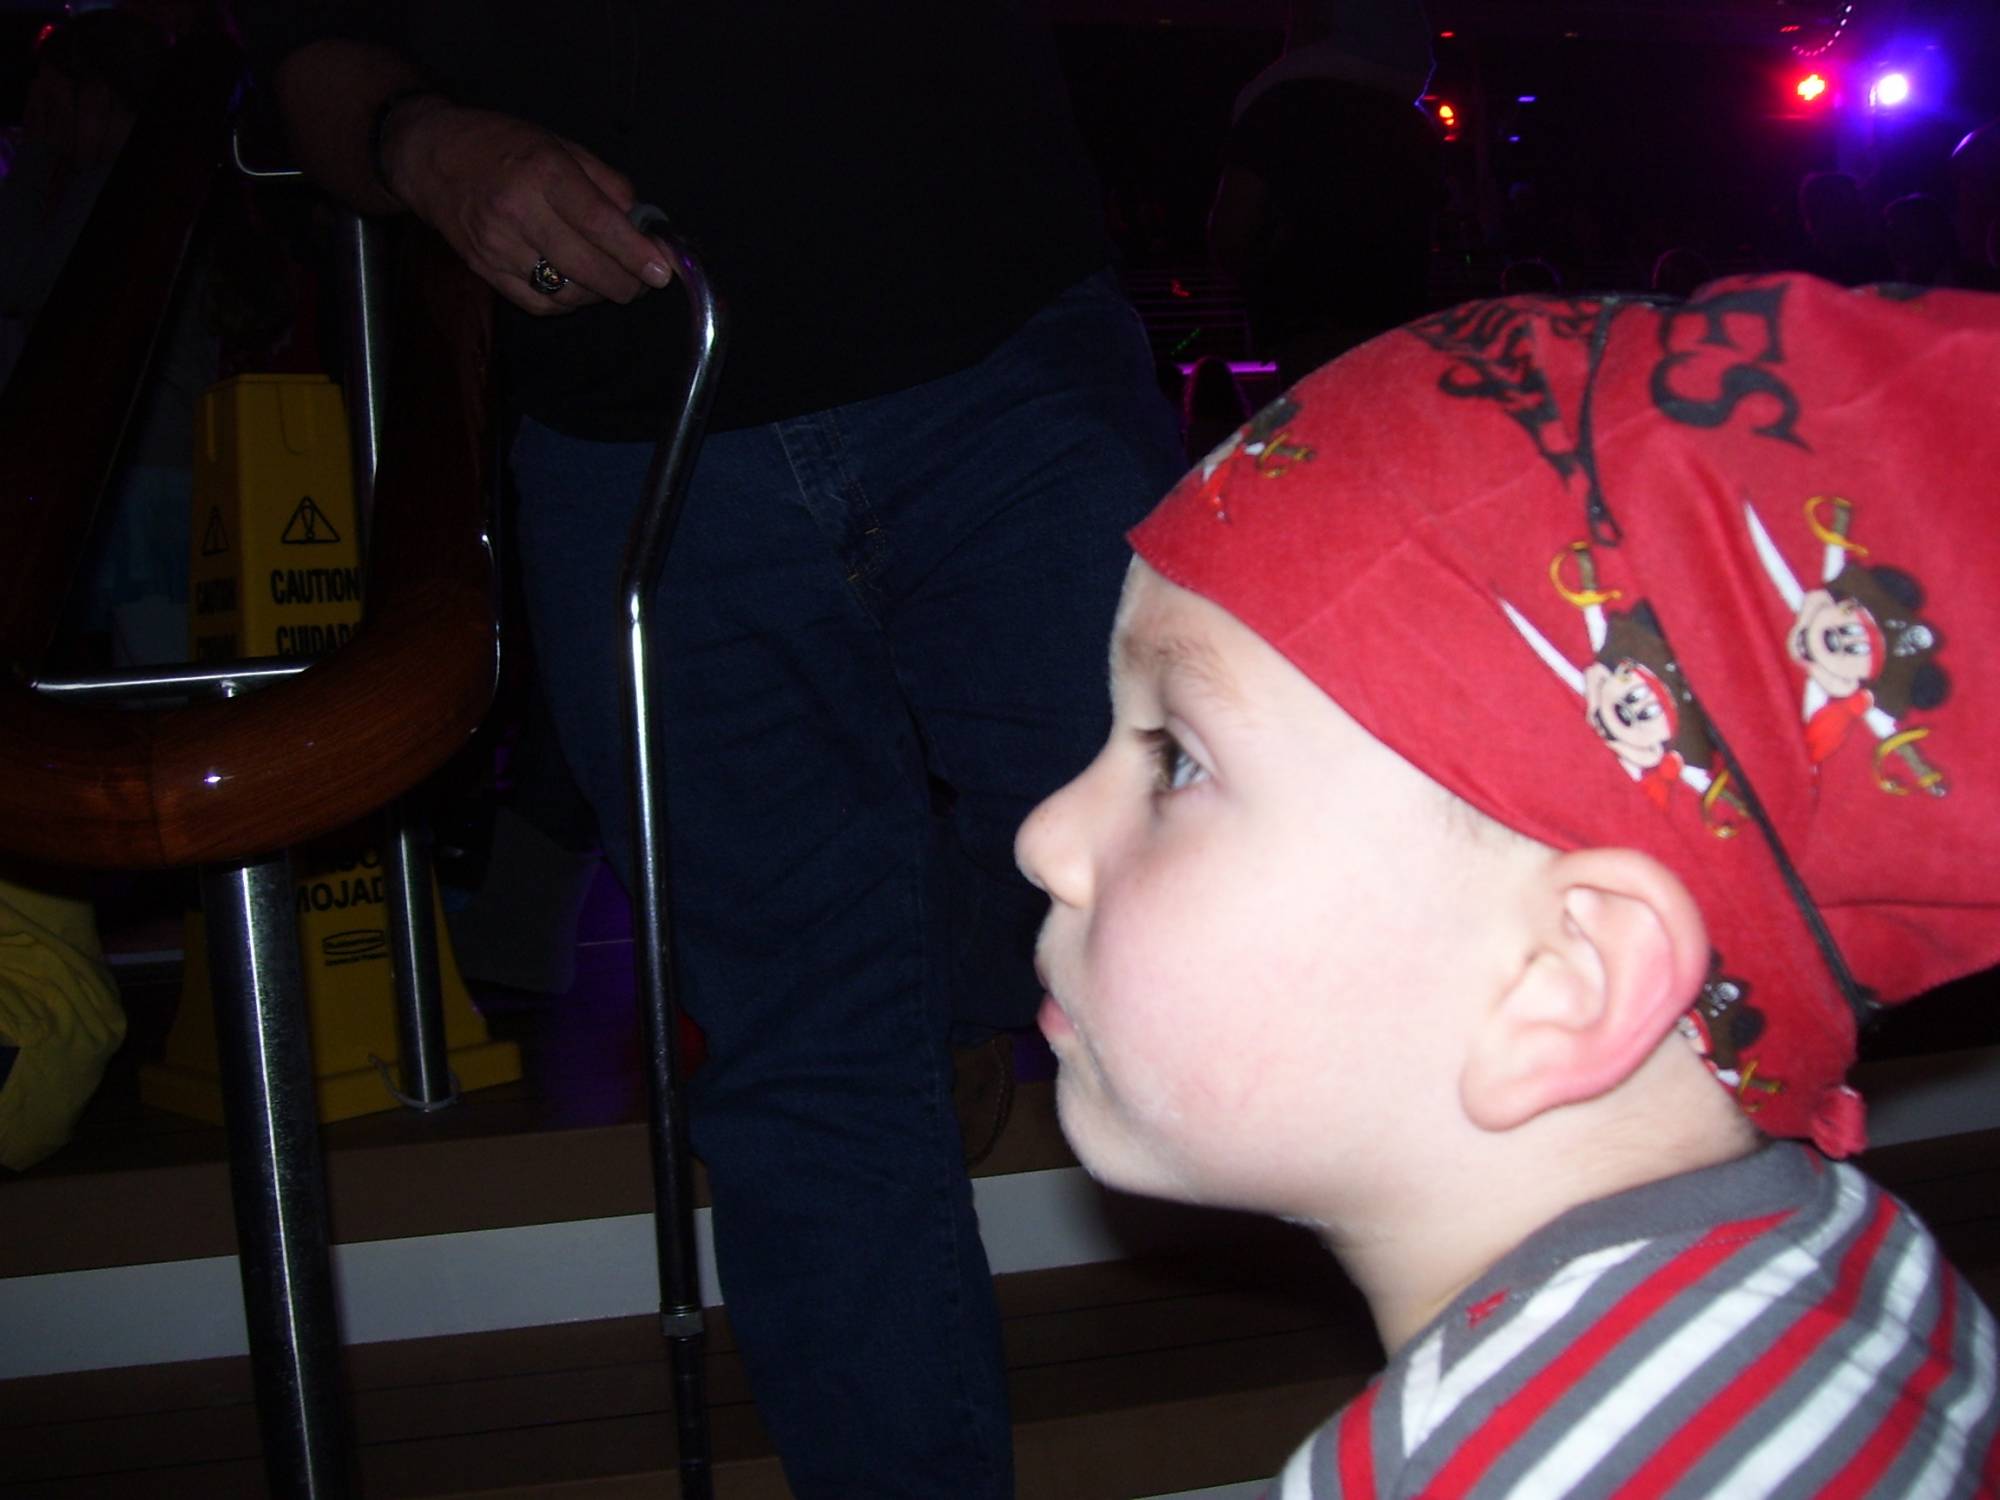 Fascinated by the Pirate Show